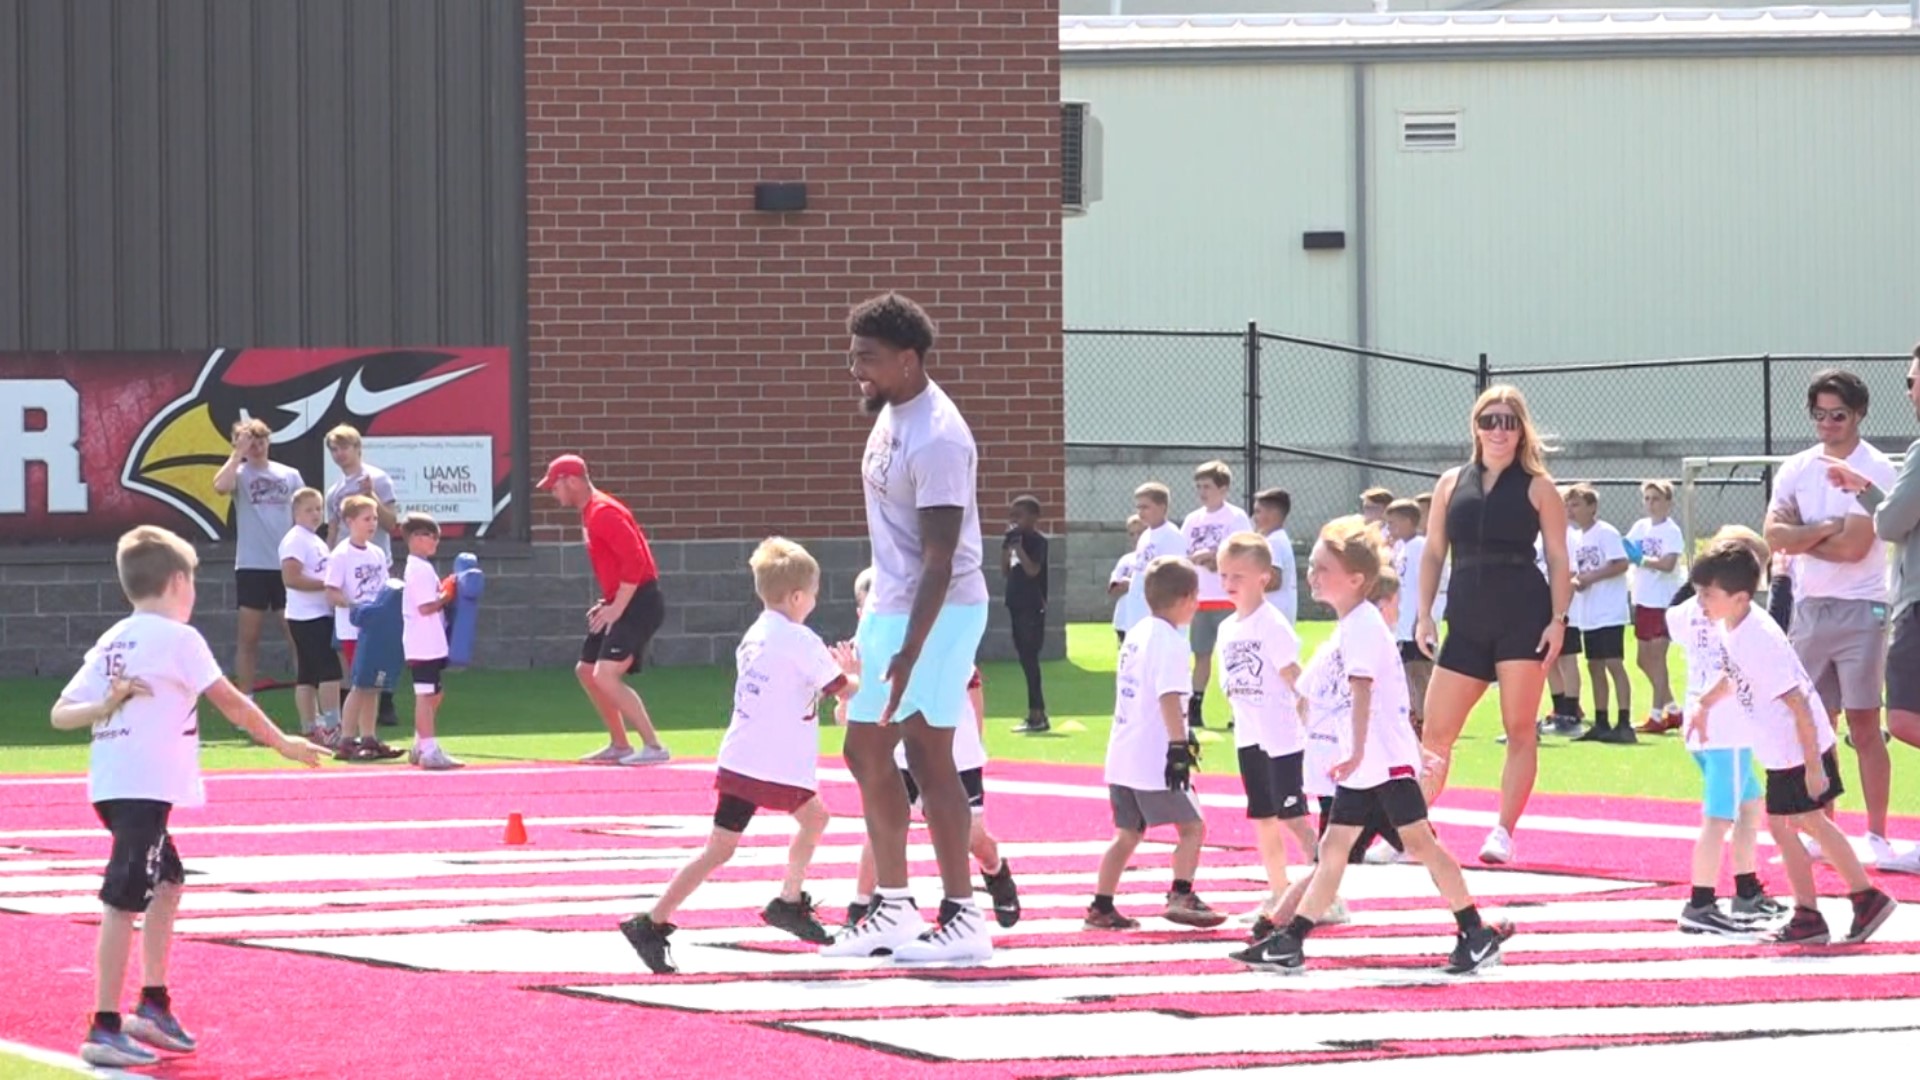 Tennessee Titans wide receiver Treylon Burks and  Arkansas quarterback K.J Jefferson hosted a youth football camp in Farmington on Saturday, May 19.